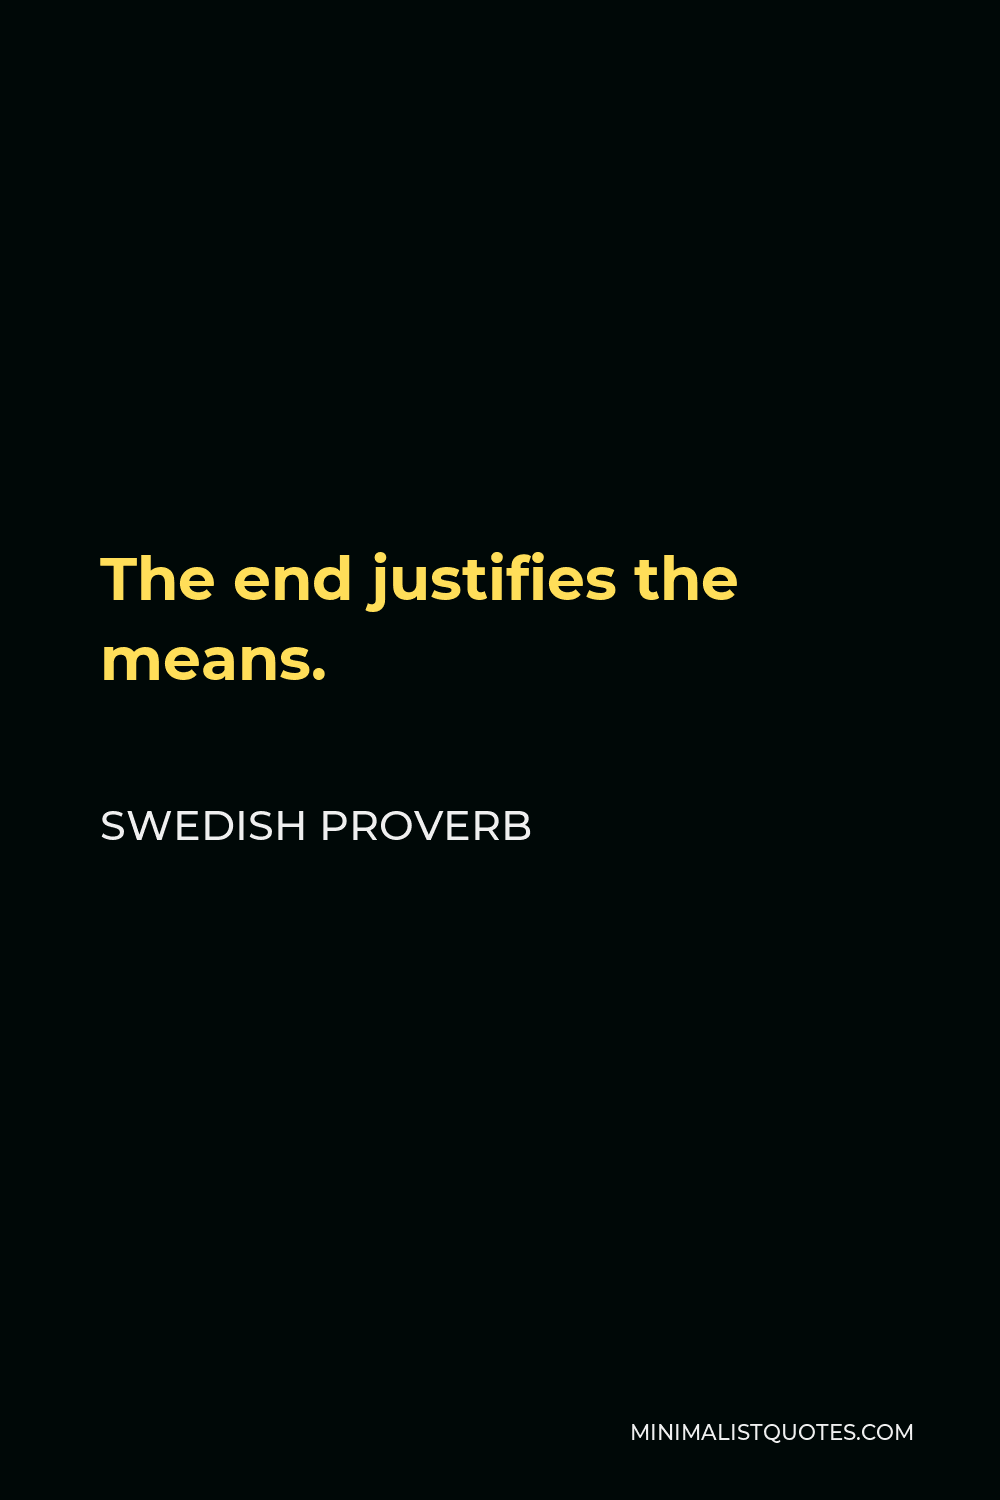 Swedish Proverb Quote - The end justifies the means.